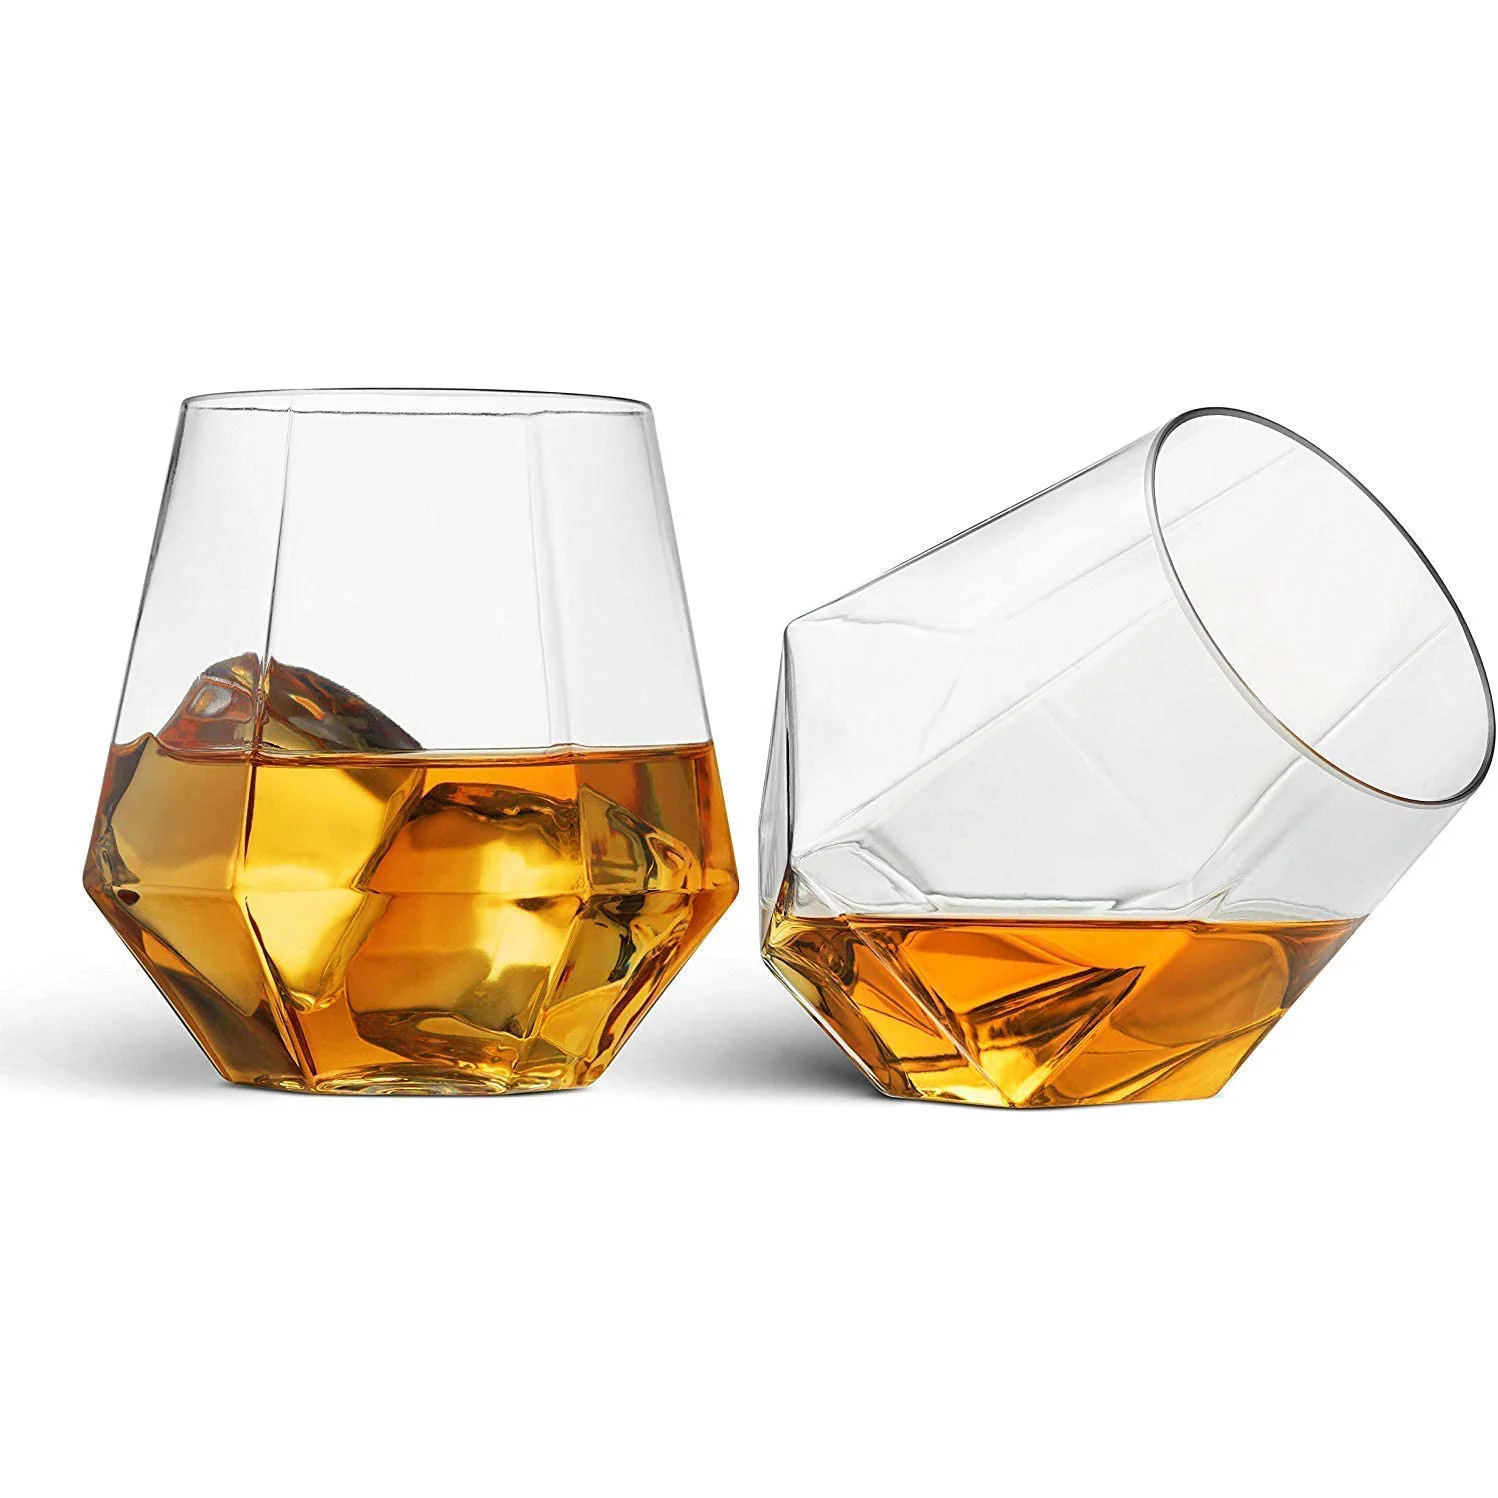 Drinking Tumblers, Hexagonal Cup Diamond Cup, Colorful Cup Whiskey